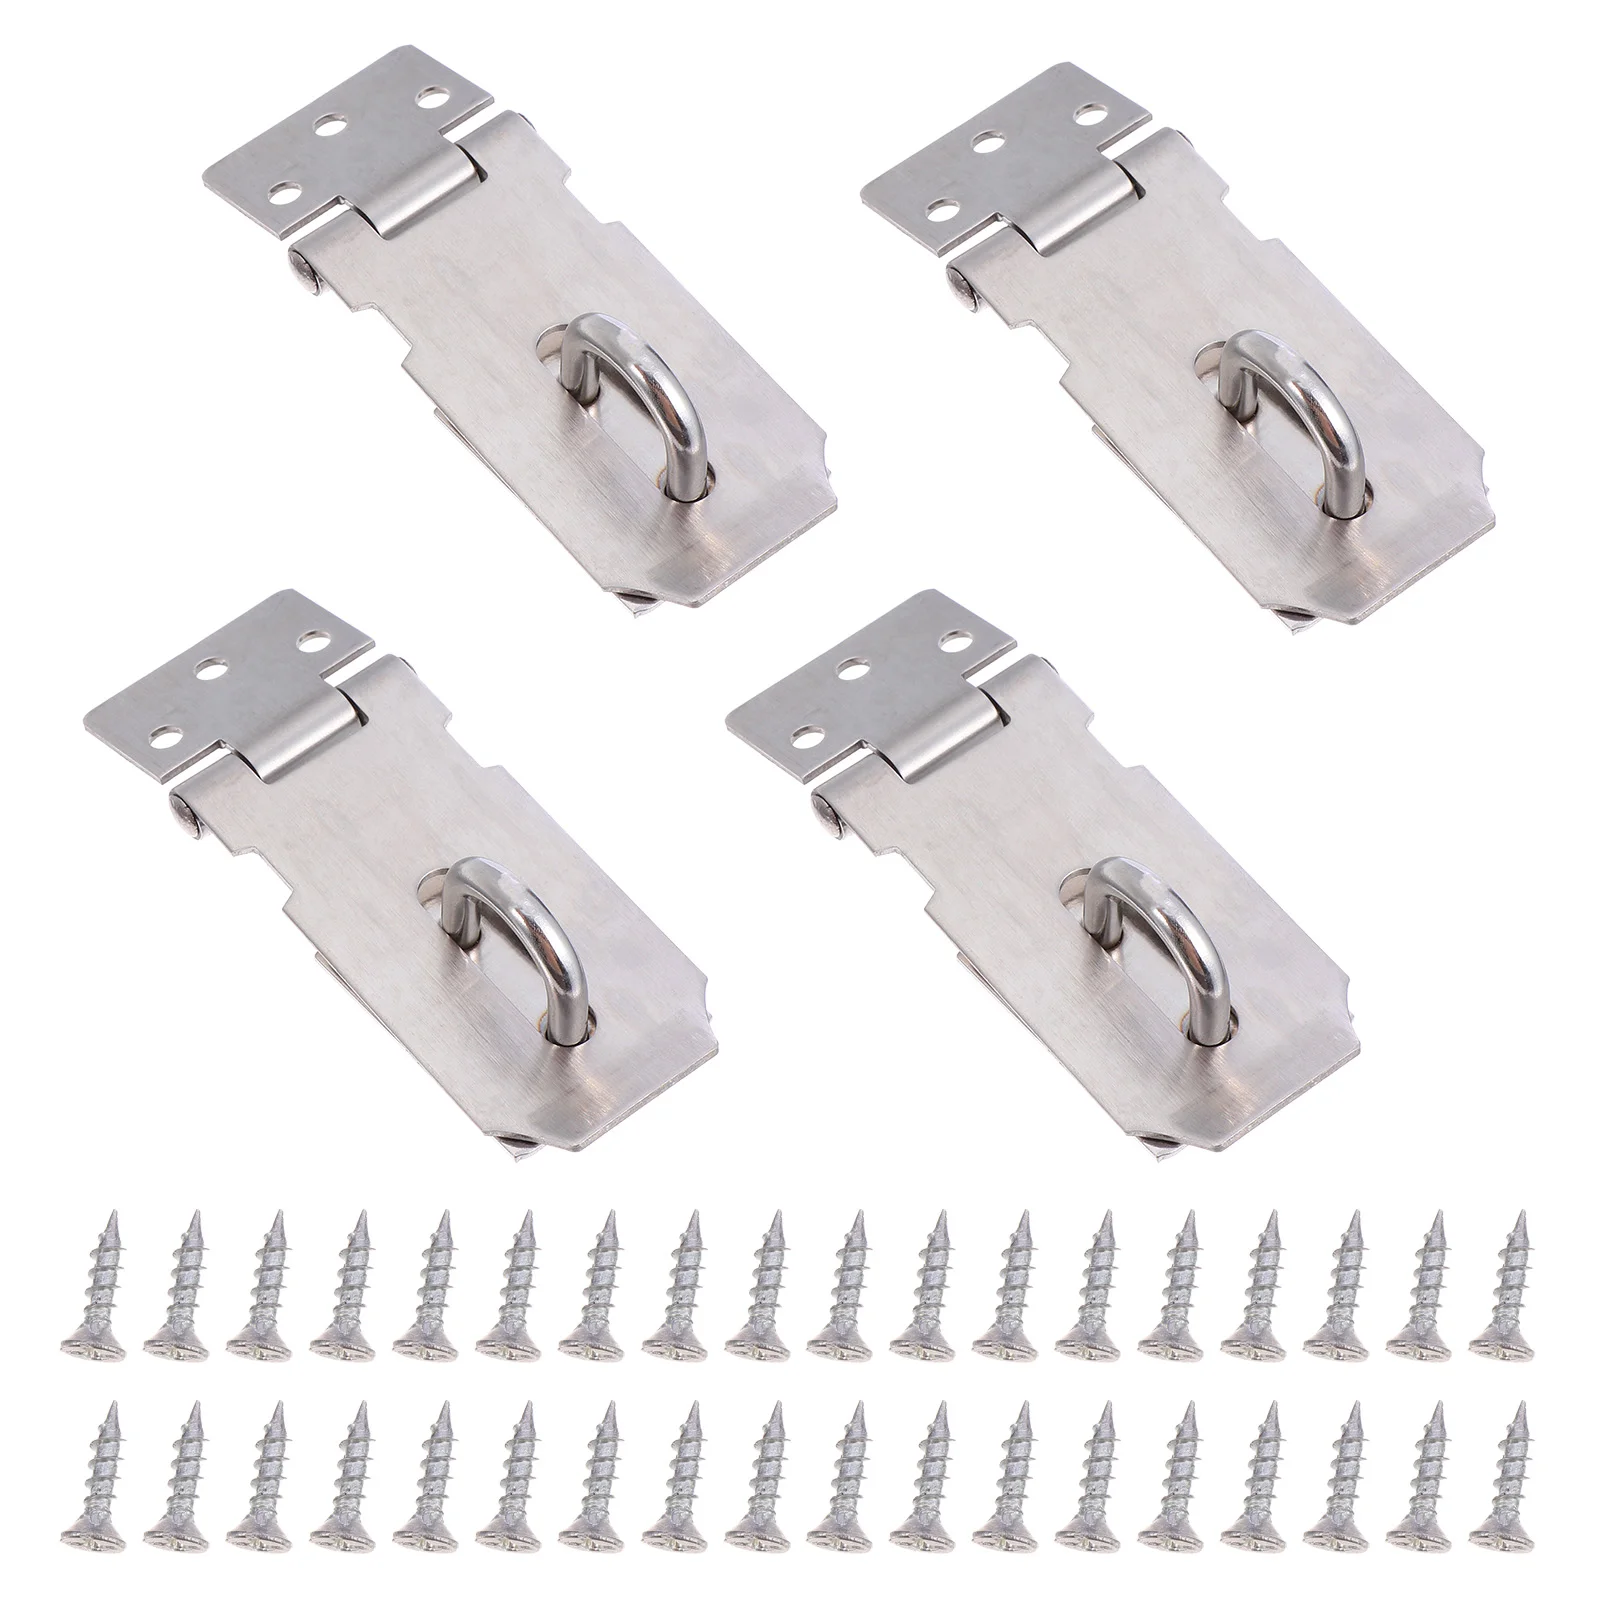 

4 Pcs Heavy Duty Staples Stainless Steel Buckle Safety Padlock Clasp Latch Door Bolt Packlock Security